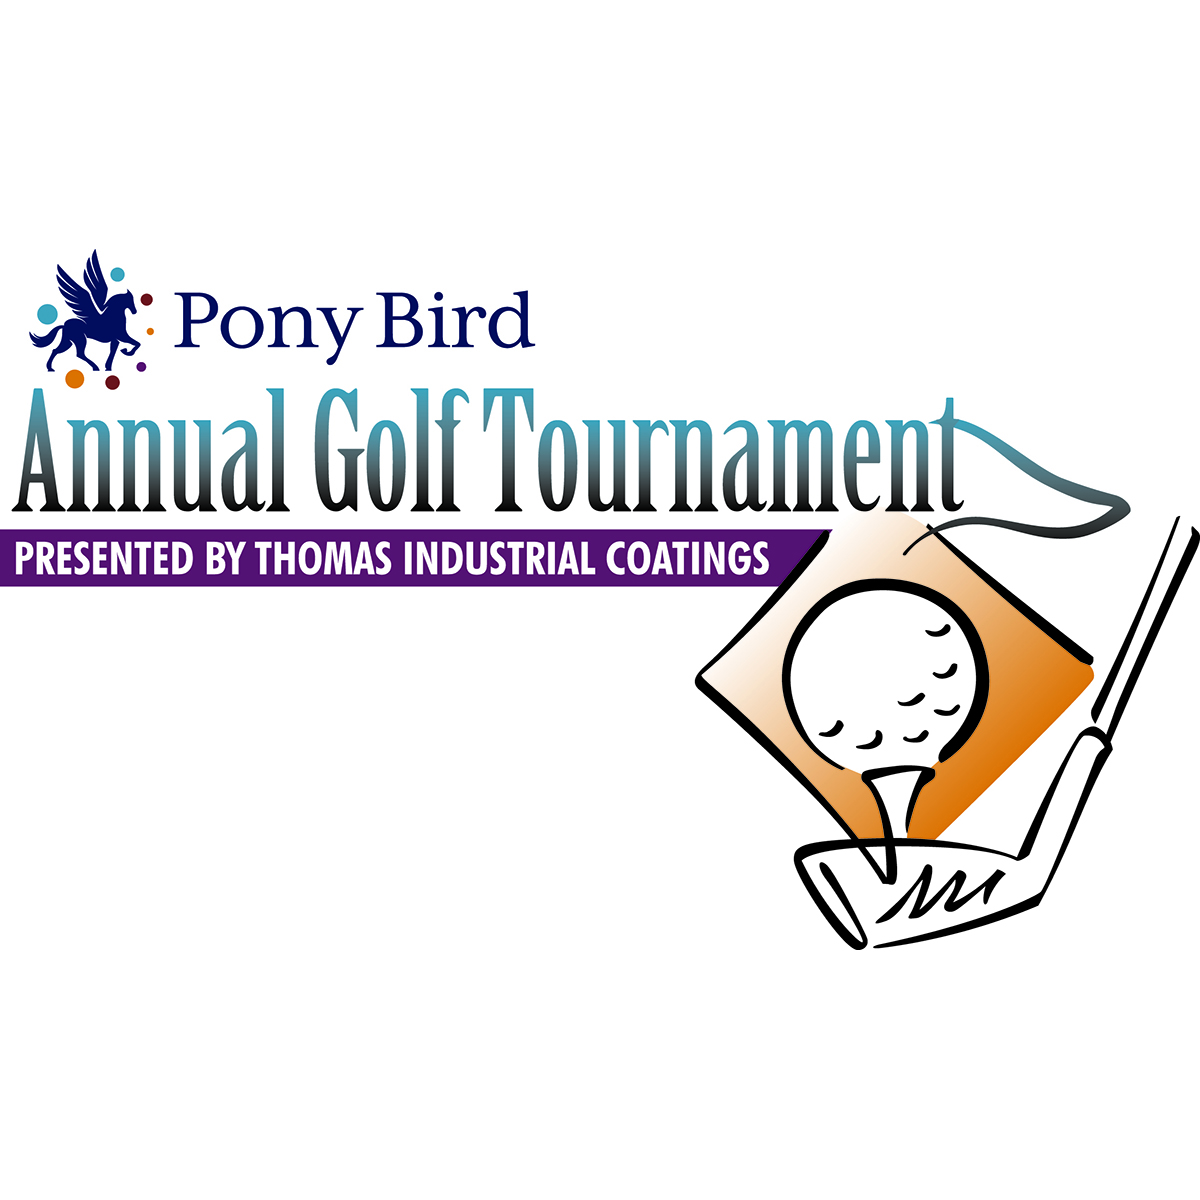 <h1 class="tribe-events-single-event-title">Pony Bird’s Annual Golf Tournament</h1>